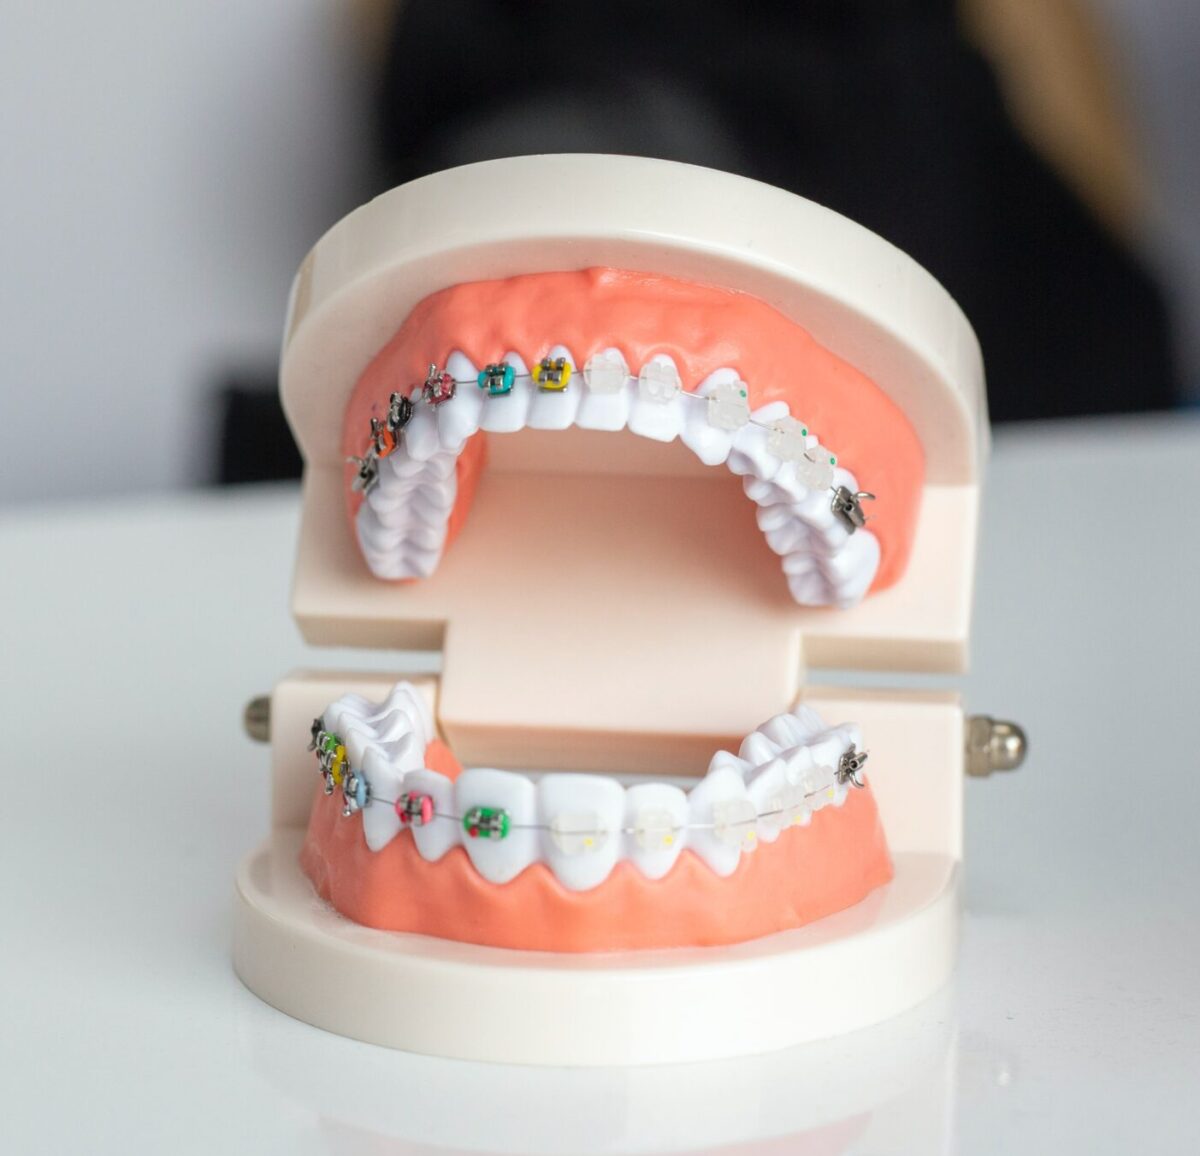 Achieve a straight and confident smile with orthodontic device solutions.